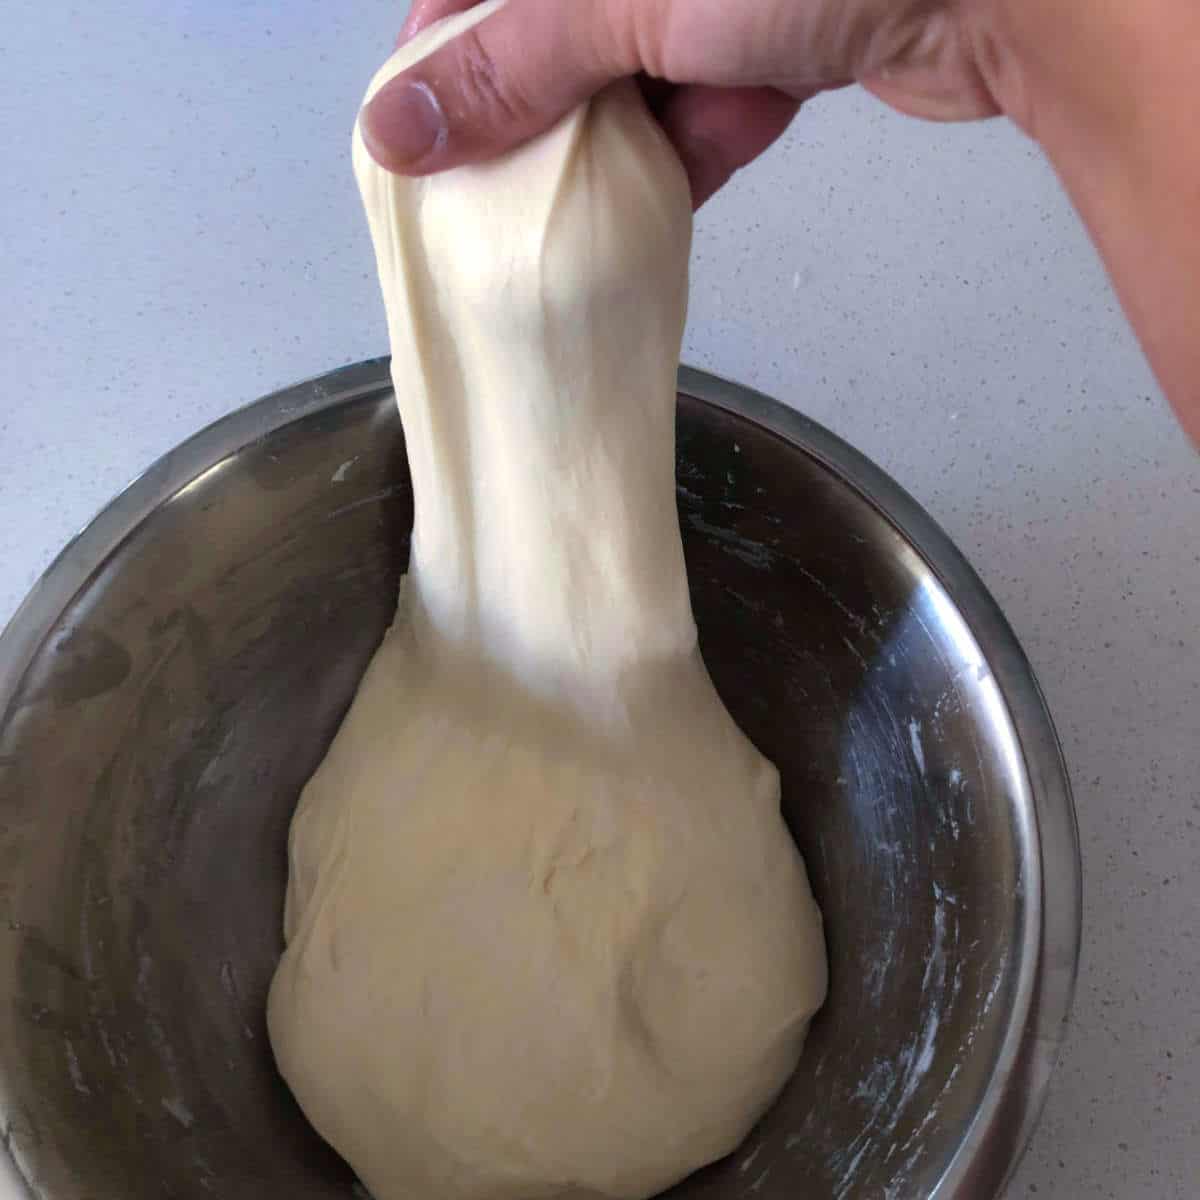 Pull the dough without breaking it.